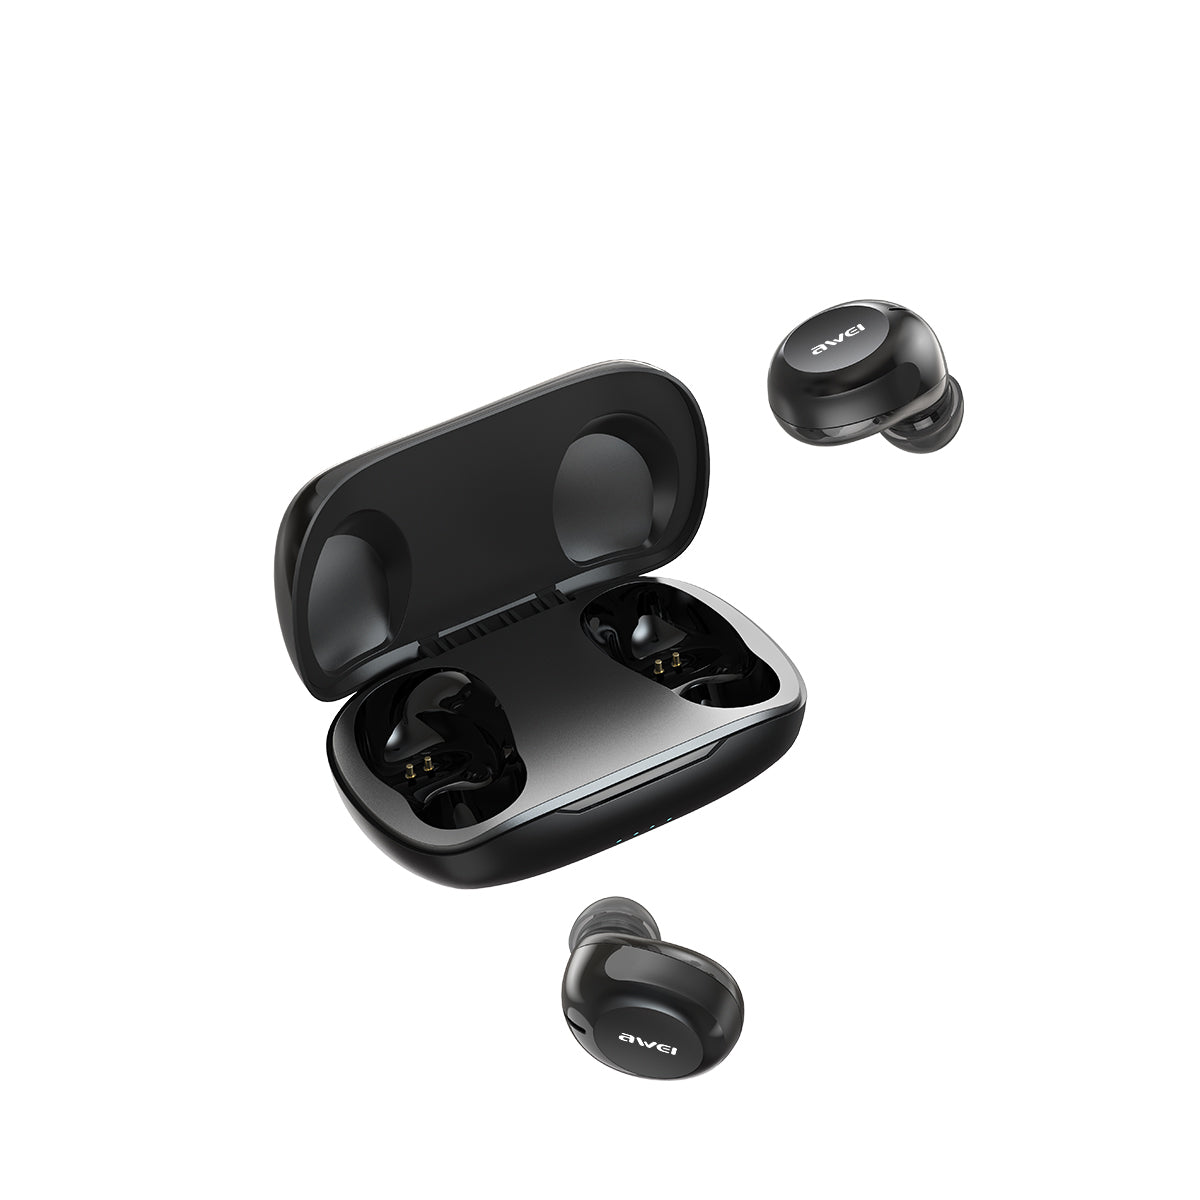 Wireless Earbuds,Bluetooth 5.0 Headphones in Ear with Charging Case, Hands-Free Headset with Mic, Touch Control, 40 Hours Playback for IOS and Android